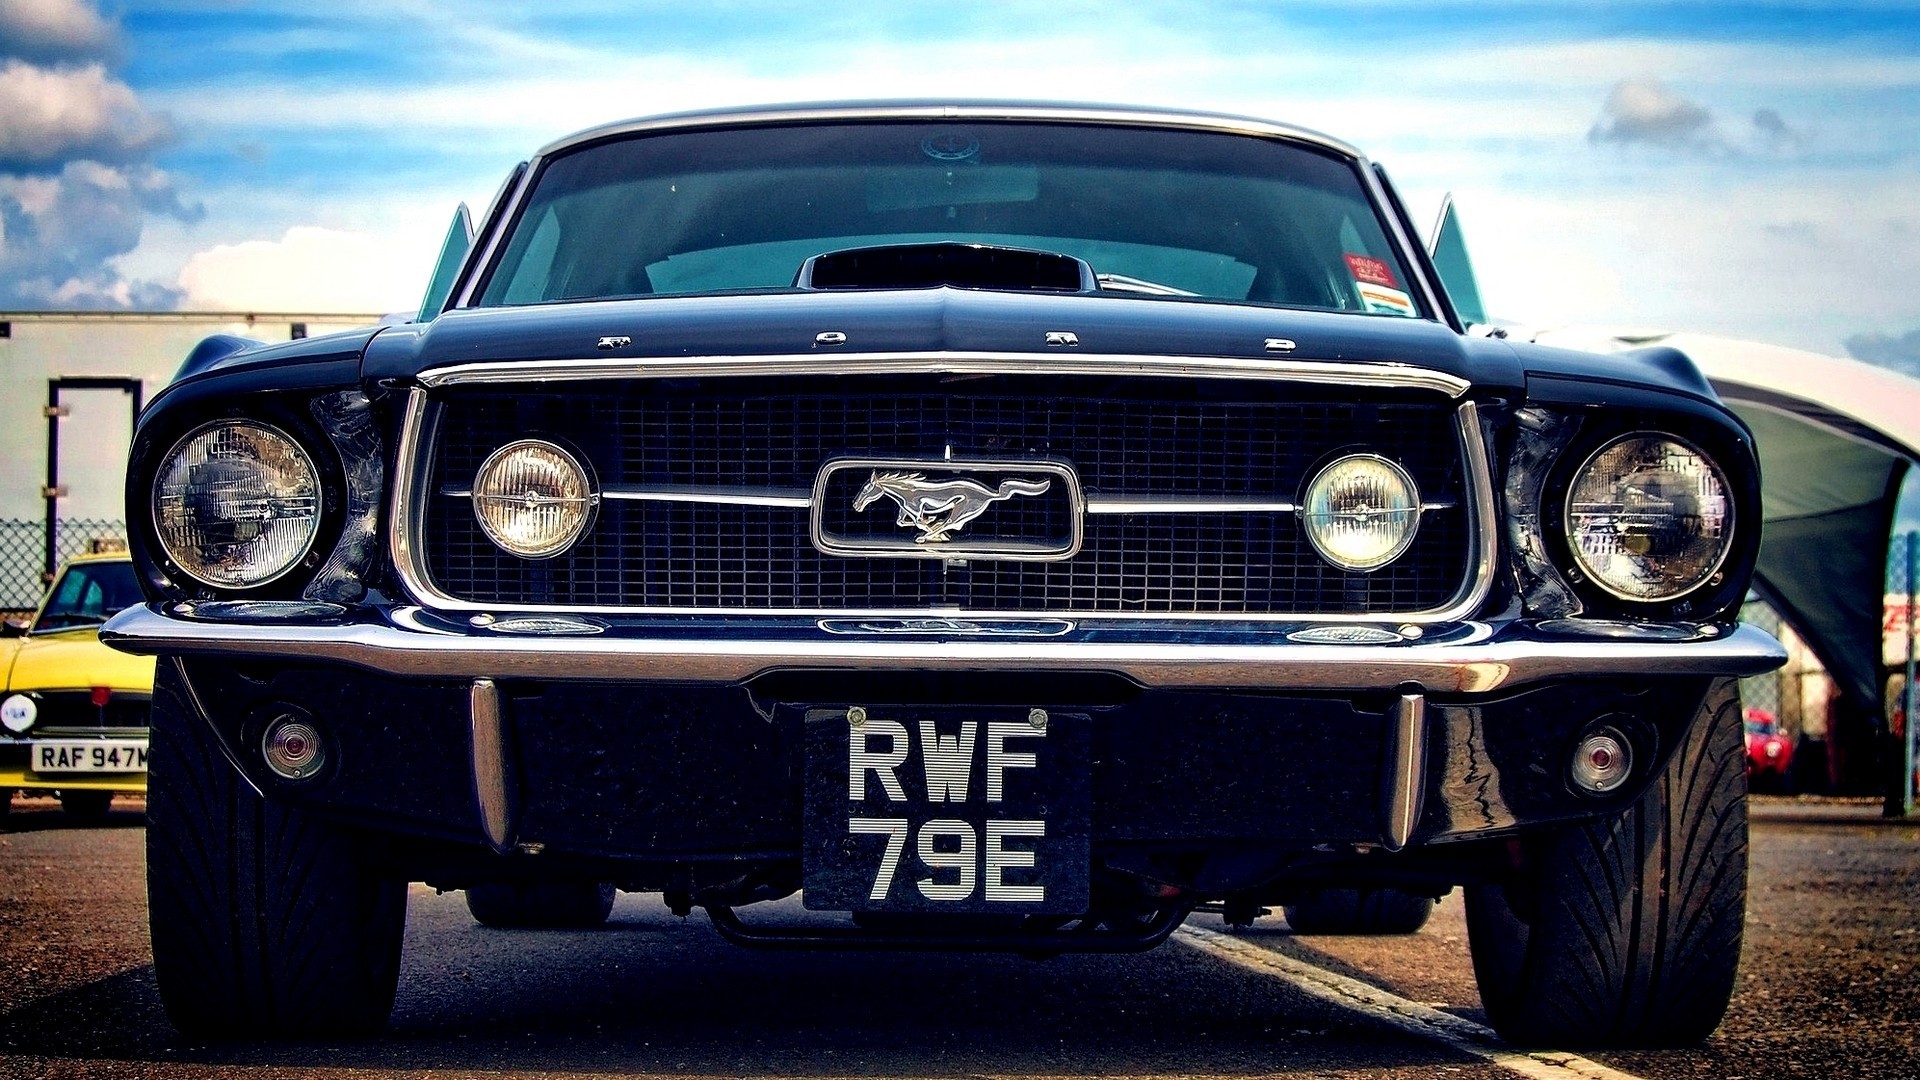 General 1920x1080 Ford Mustang car low-angle frontal view Ford black cars vehicle muscle cars American cars